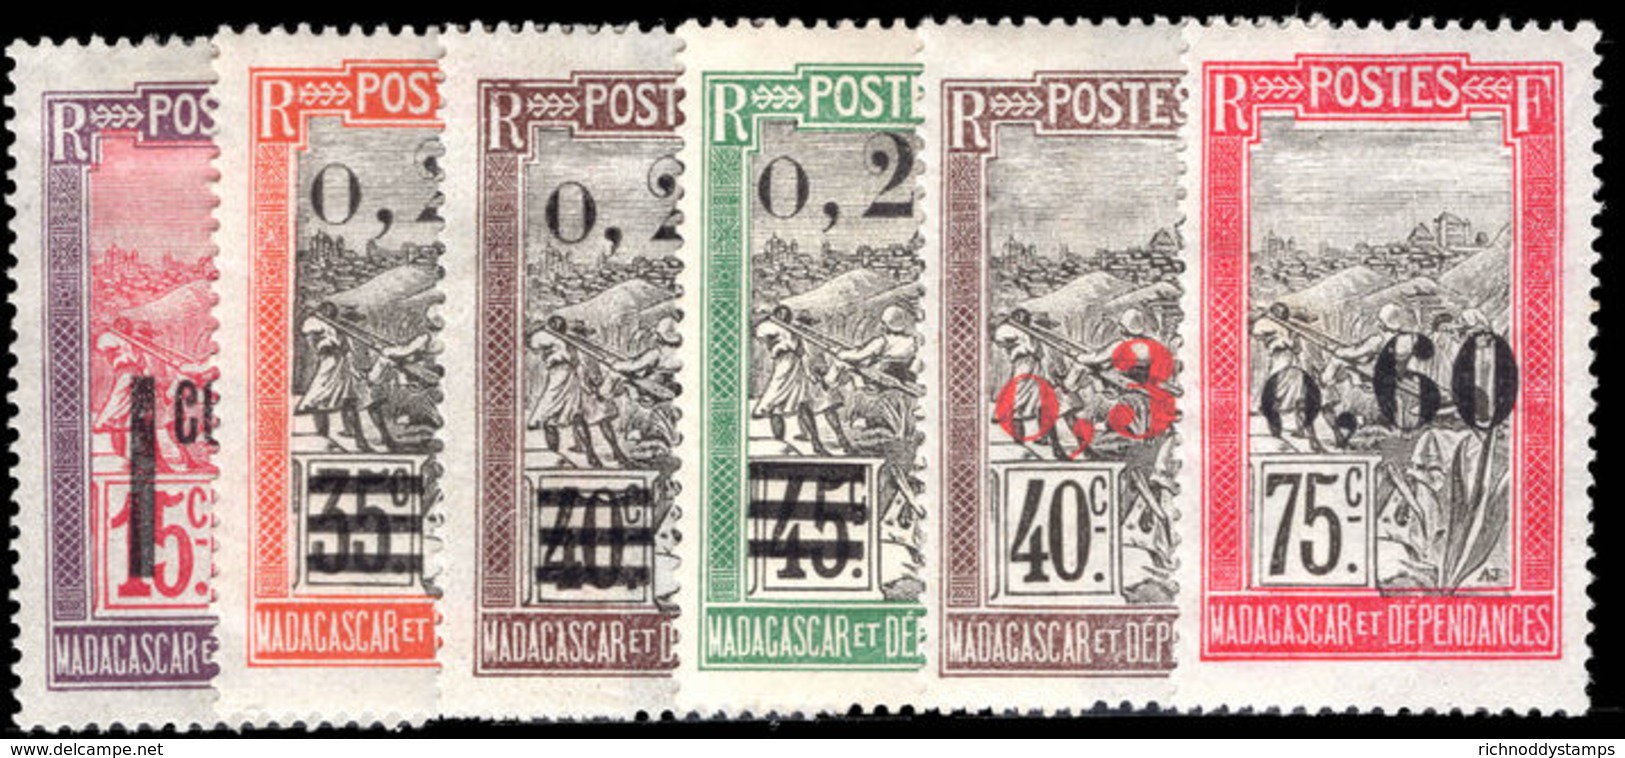 Madagascar 1921 Provisional Overprints On 1908-17 Issues Set Fine Lightly Mounted Mint. - Unused Stamps